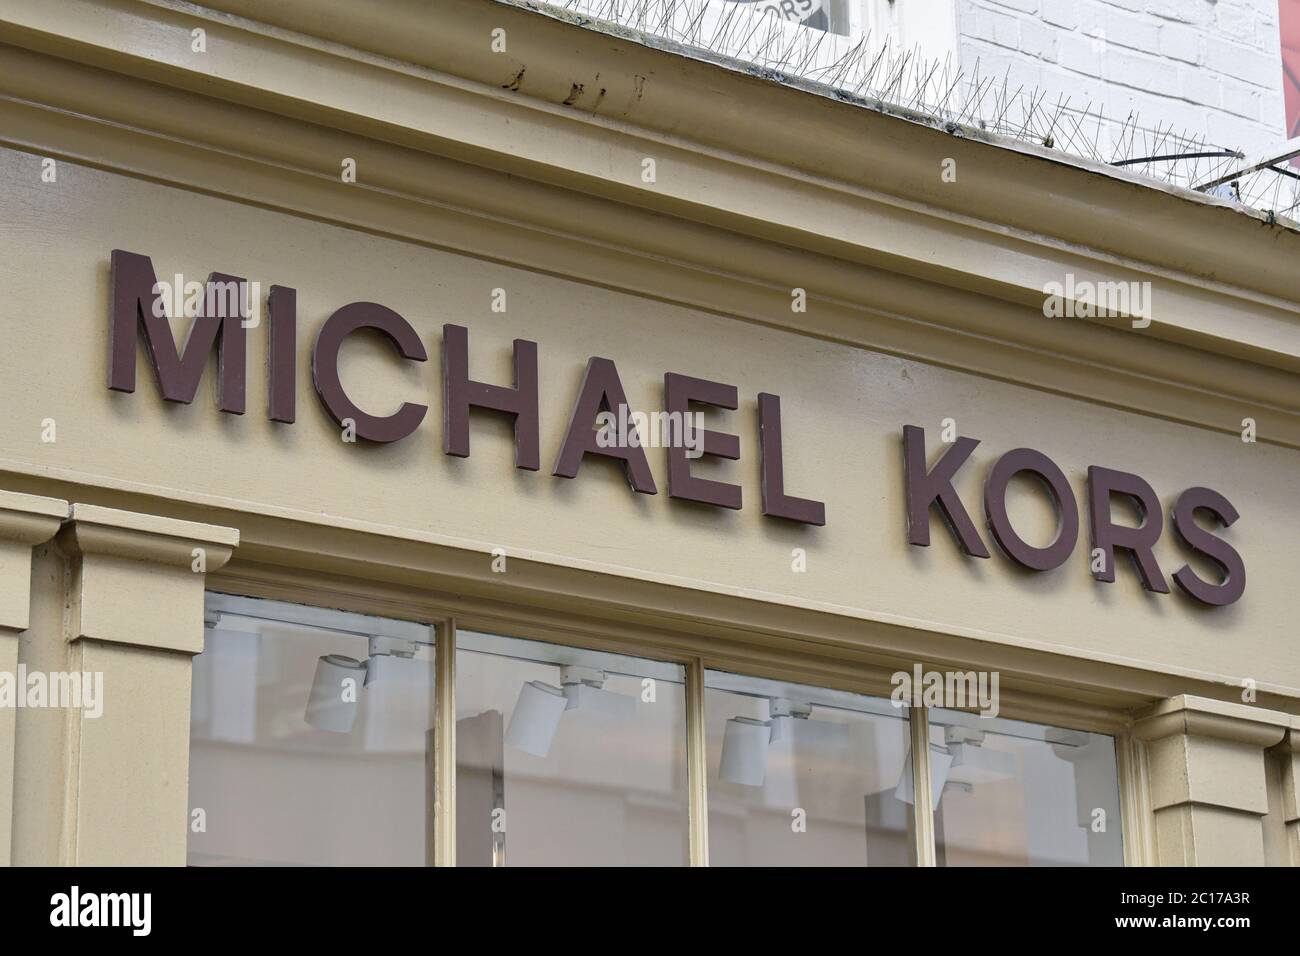 London, UK. 28th May, 2020. Michael Kors shop logo in Covent Garden. Credit: Dave Rushen/SOPA Images/ZUMA Wire/Alamy Live News Stock Photo -